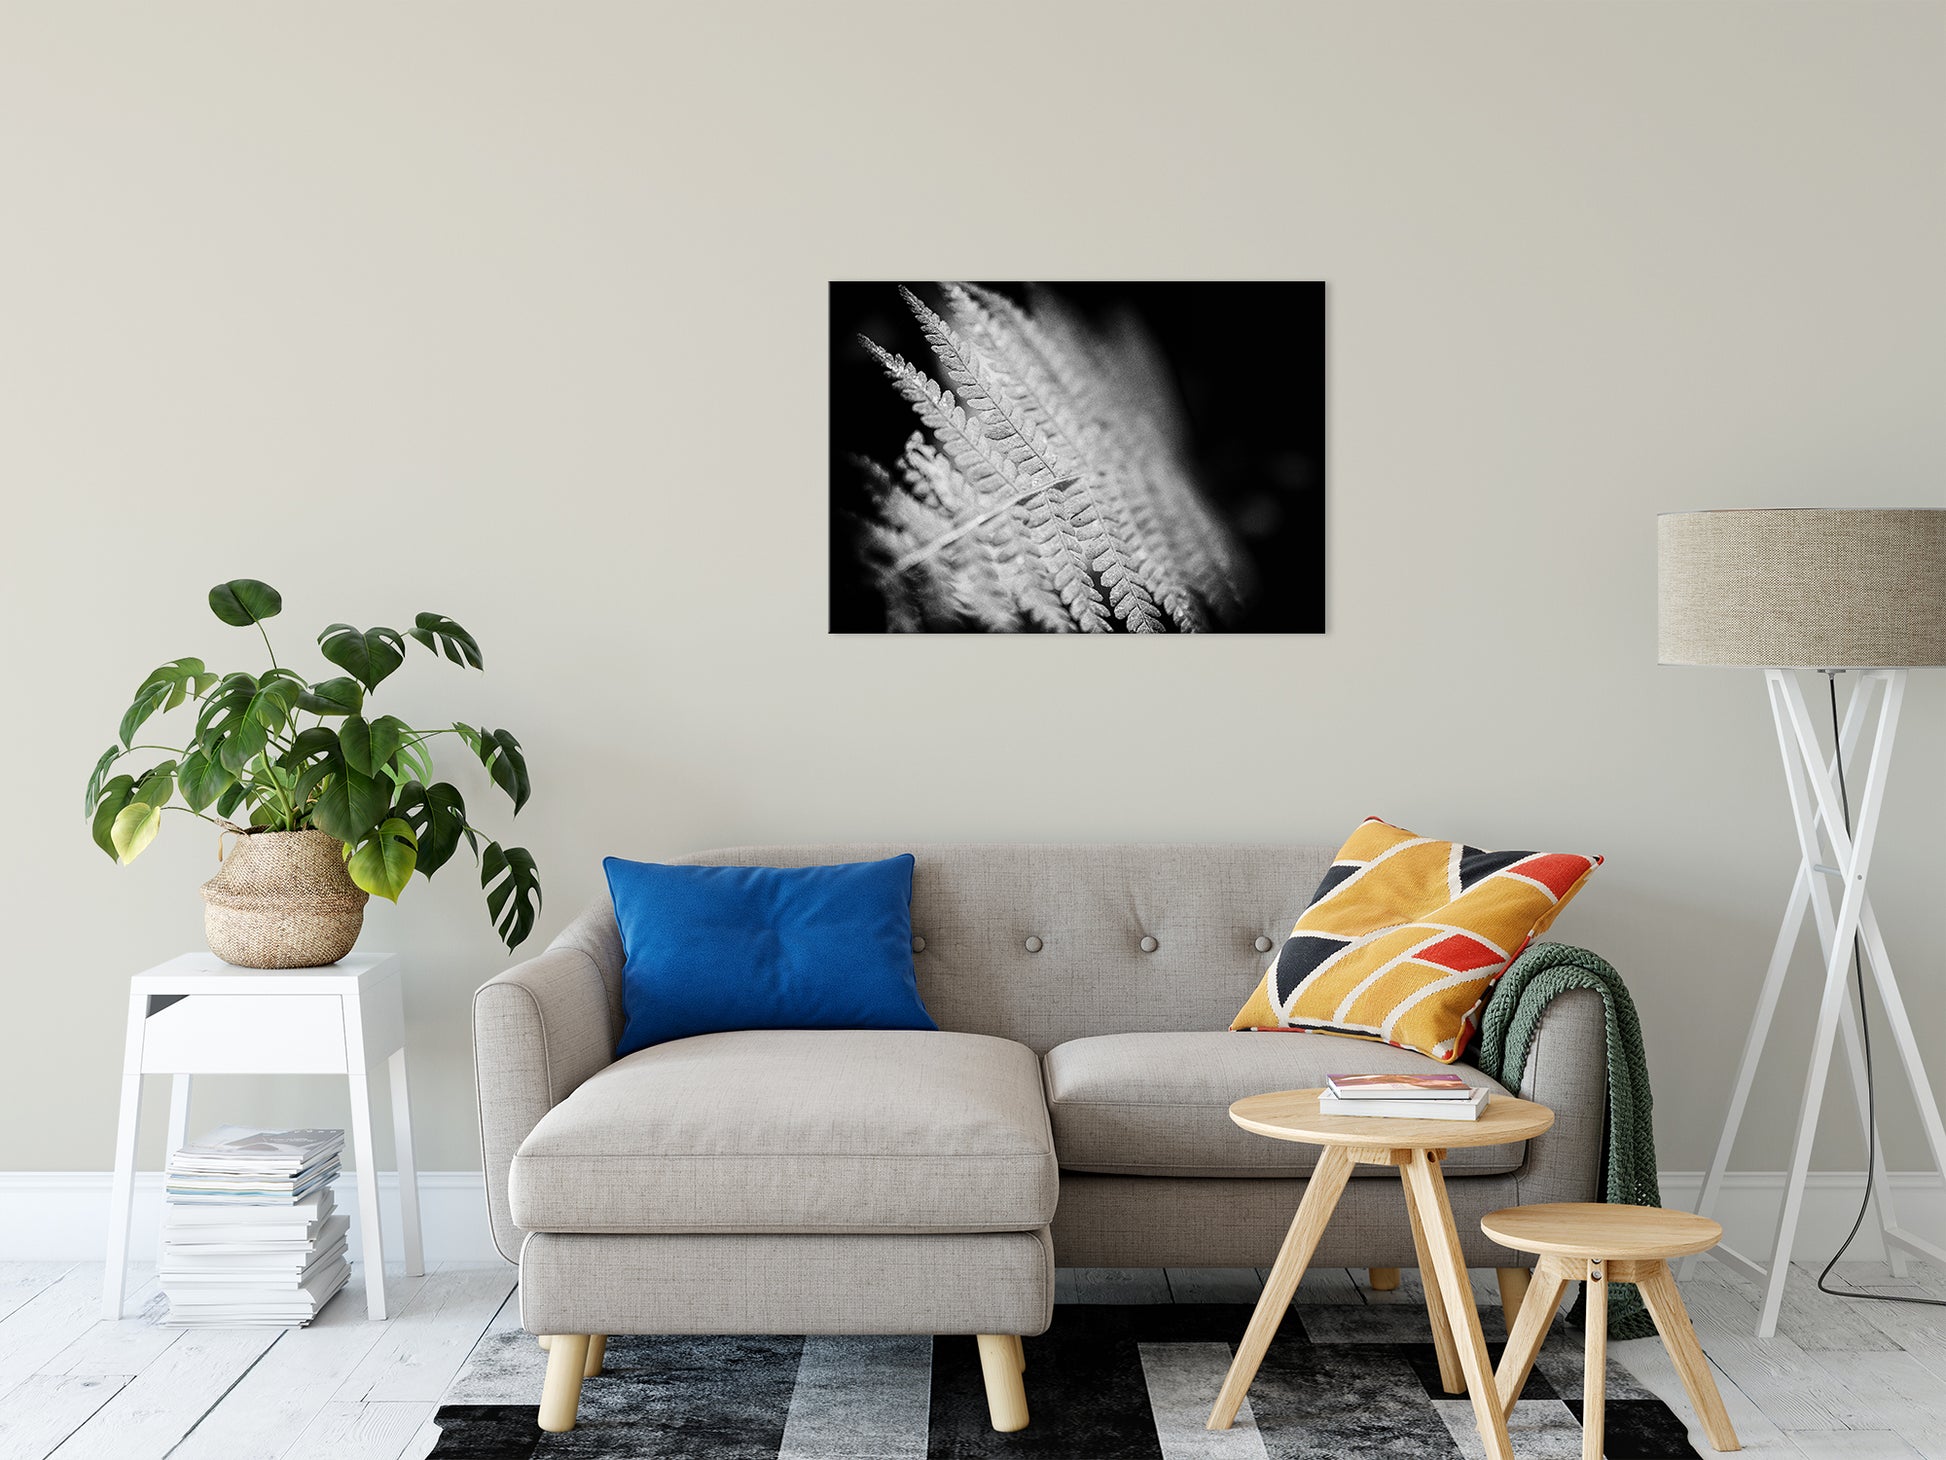 Fern Leaf in the Sunlight Botanical / Nature Photo Fine Art Canvas Wall Art Prints 24" x 36" - PIPAFINEART